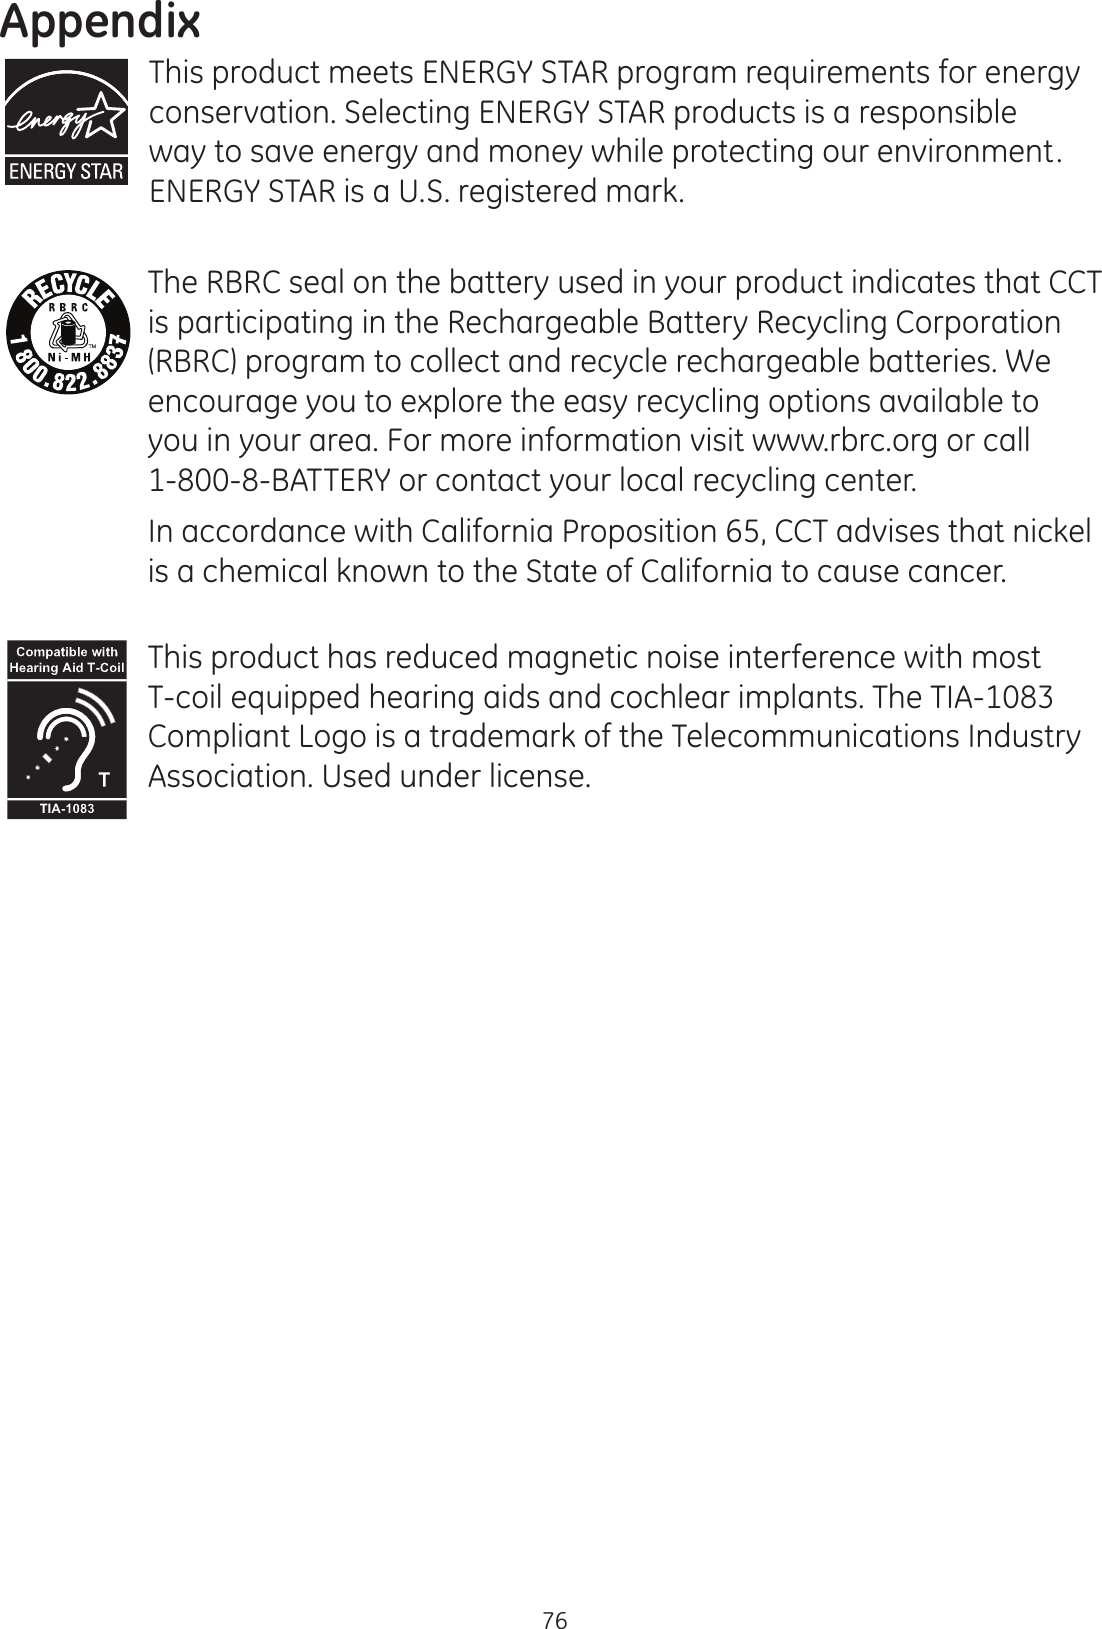 Appendix76This product meets ENERGY STAR program requirements for energy conservation. Selecting ENERGY STAR products is a responsible way to save energy and money while protecting our environment. ENERGY STAR is a U.S. registered mark.The RBRC seal on the battery used in your product indicates that CCT is participating in the Rechargeable Battery Recycling Corporation (RBRC) program to collect and recycle rechargeable batteries. We encourage you to explore the easy recycling options available to you in your area. For more information visit www.rbrc.org or call 1-800-8-BATTERY or contact your local recycling center.In accordance with California Proposition 65, CCT advises that nickel is a chemical known to the State of California to cause cancer.This product has reduced magnetic noise interference with most T-coil equipped hearing aids and cochlear implants. The TIA-1083 Compliant Logo is a trademark of the Telecommunications Industry Association. Used under license.